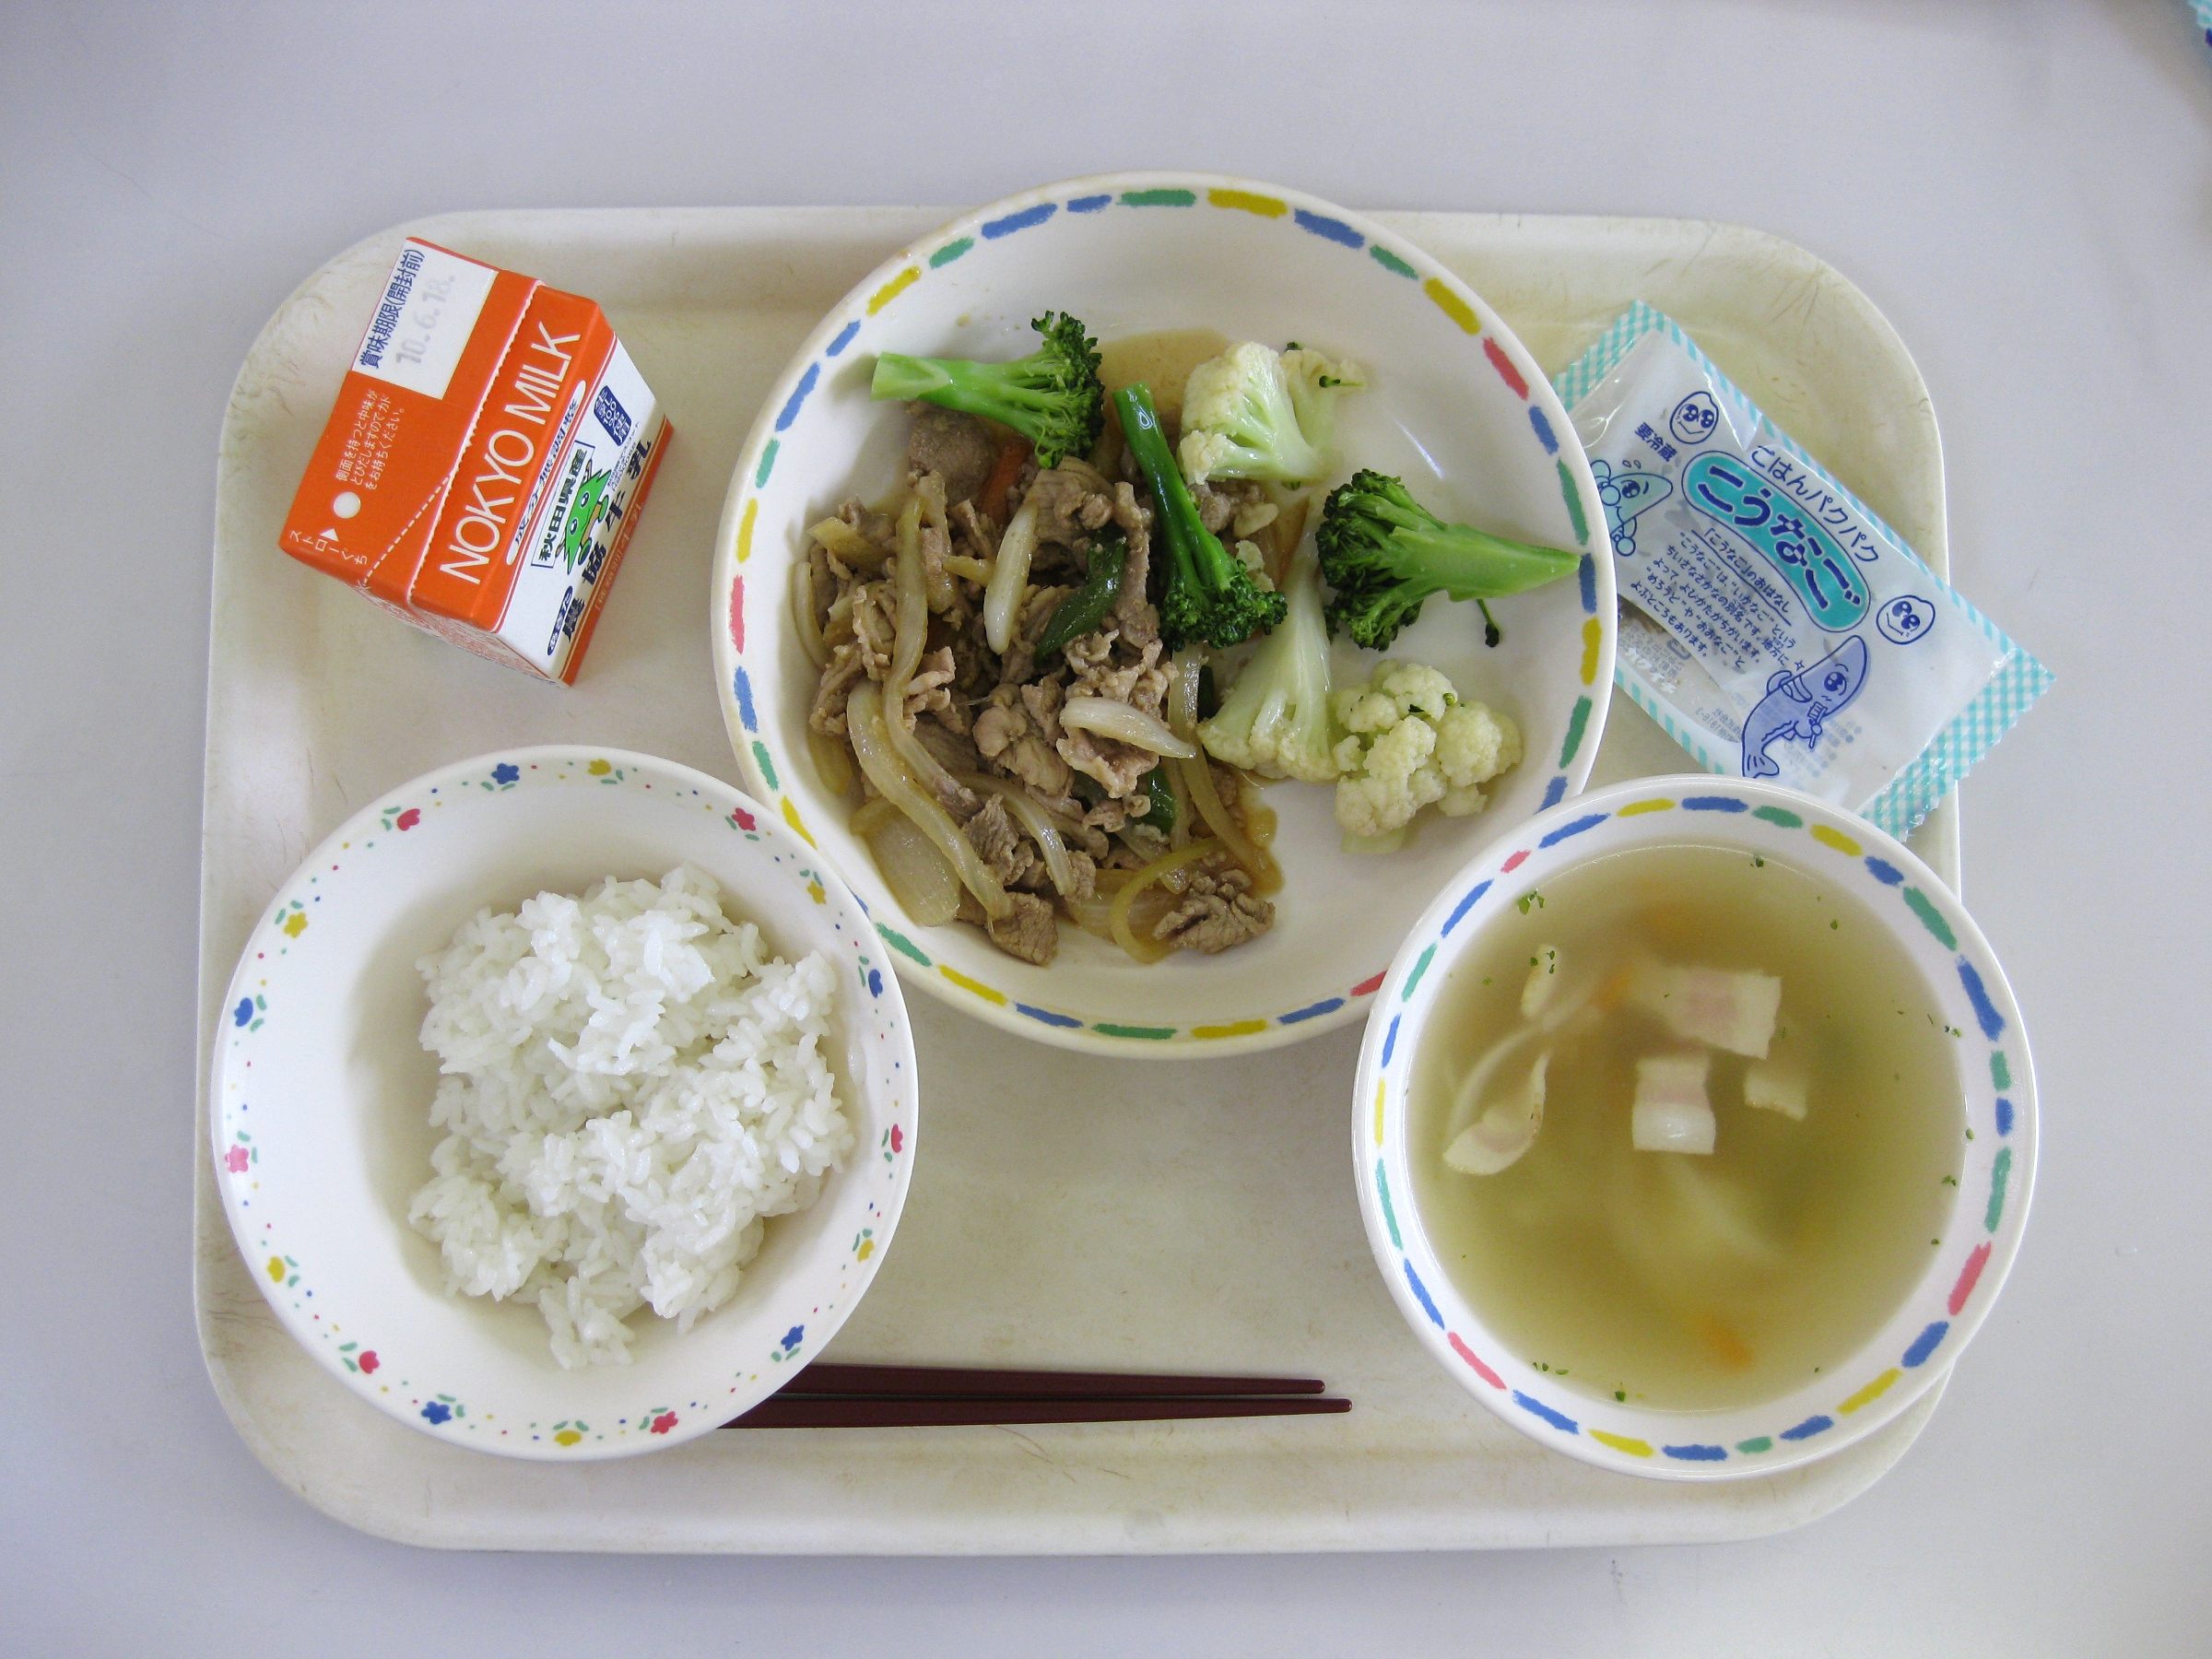 Japanese school lunches often include milk, like American school lunches.